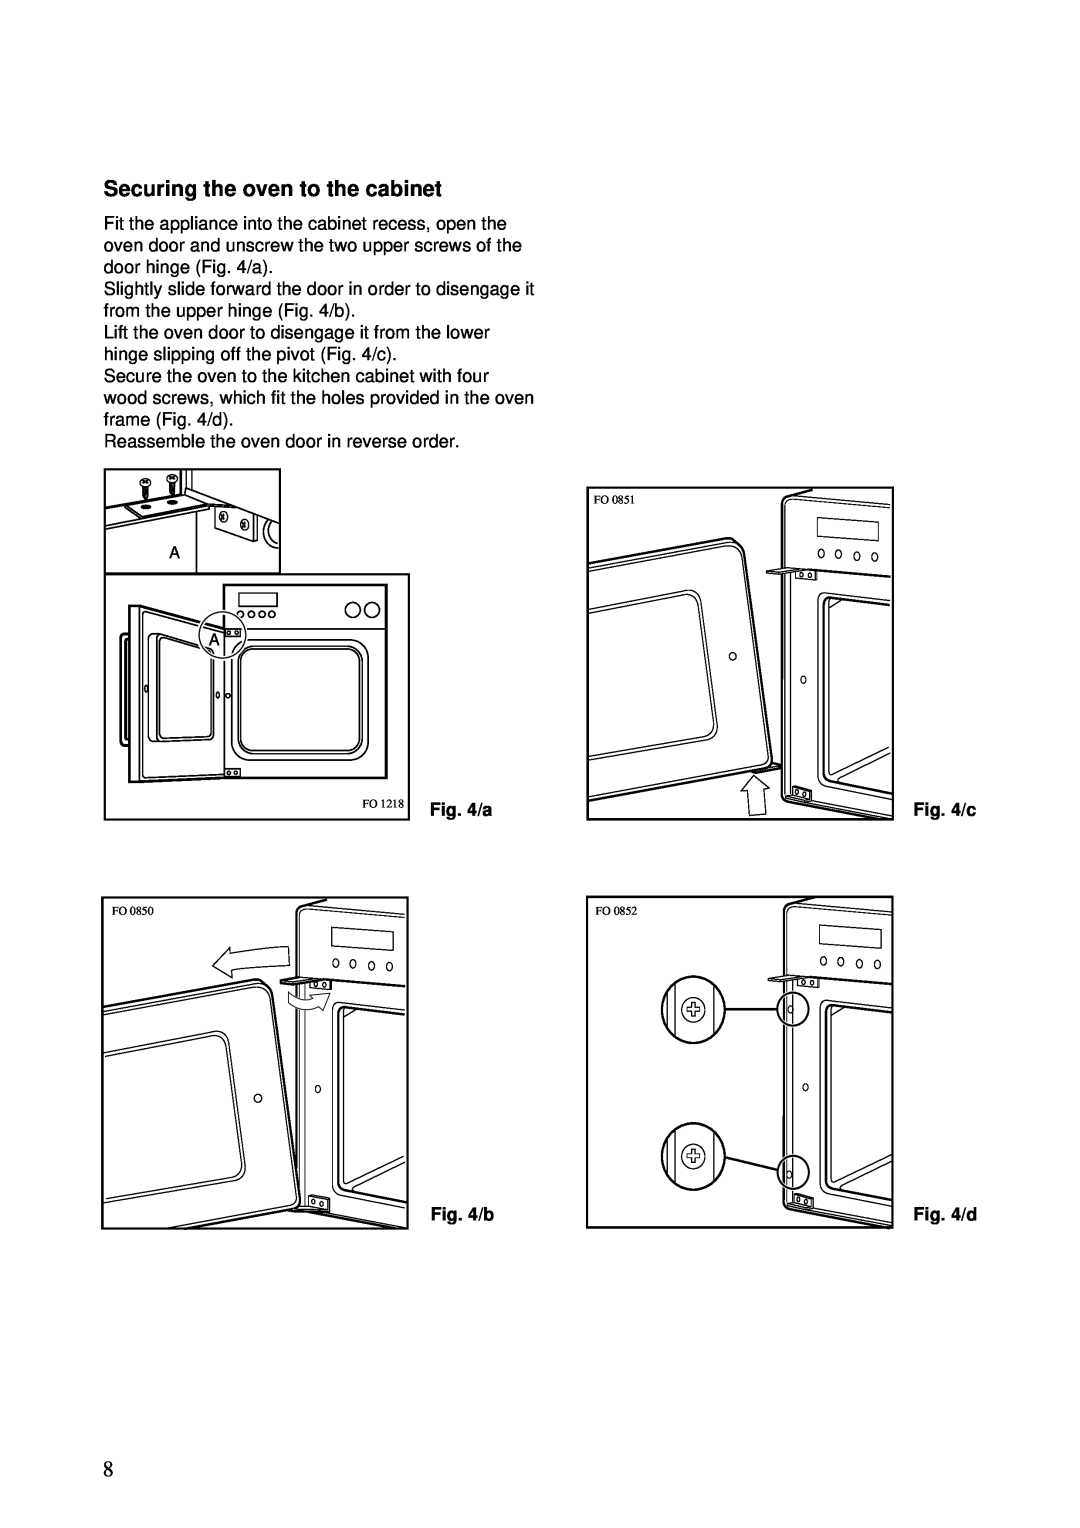 Zanussi ZBS 701 installation manual Securing the oven to the cabinet, d 